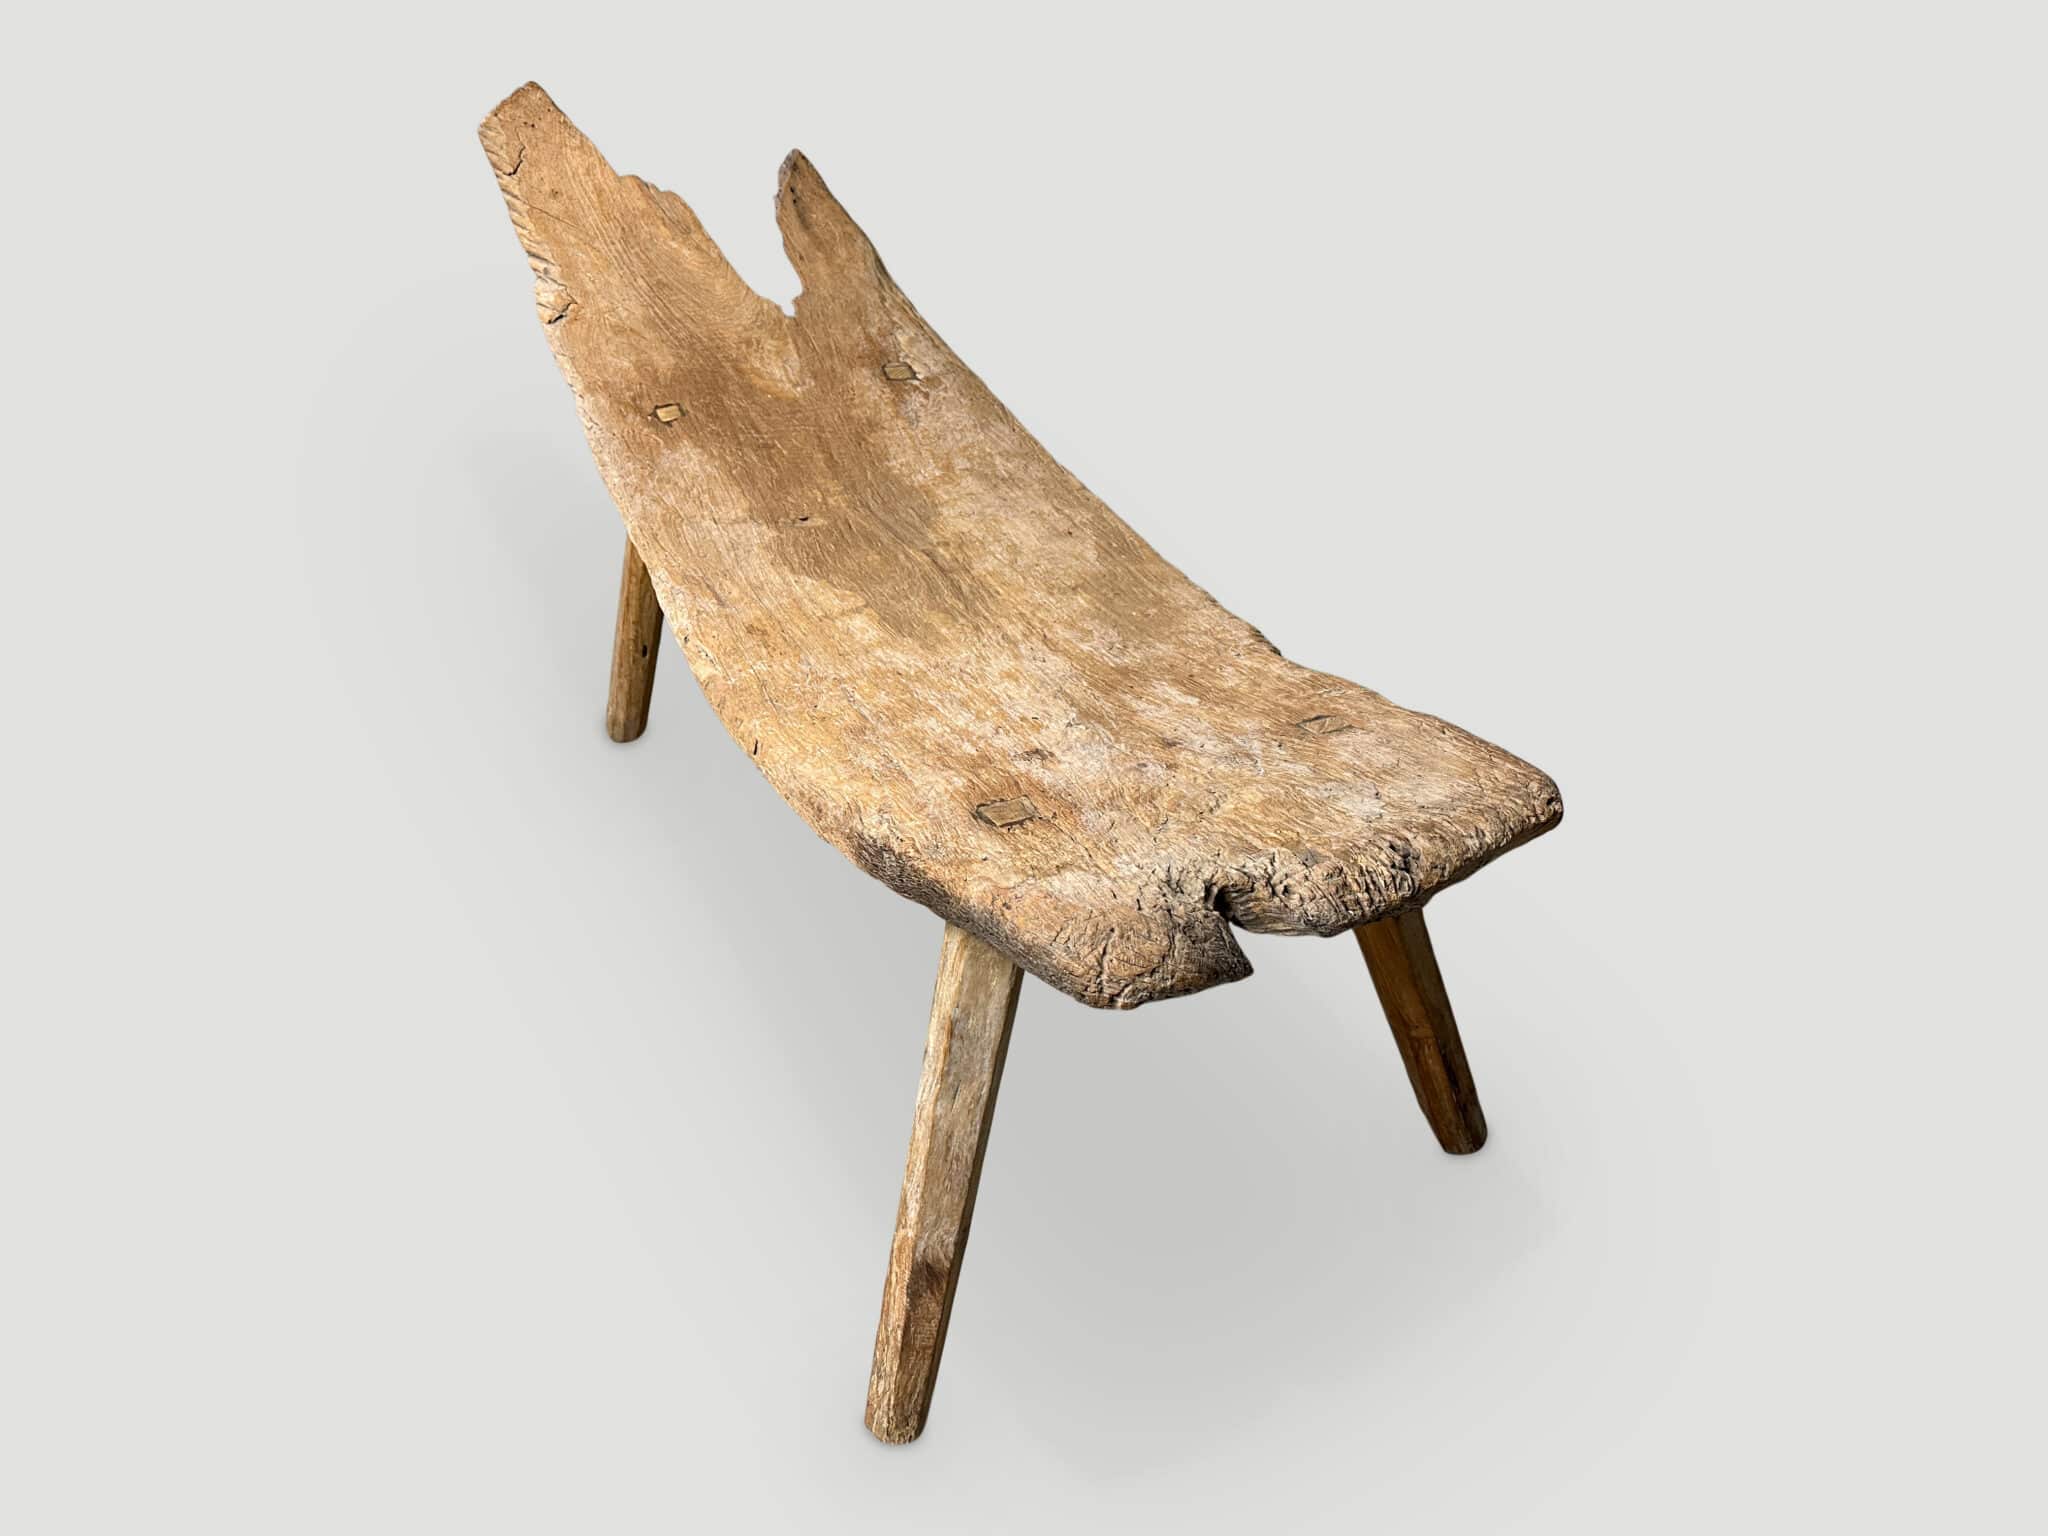 single slab chaise or bench